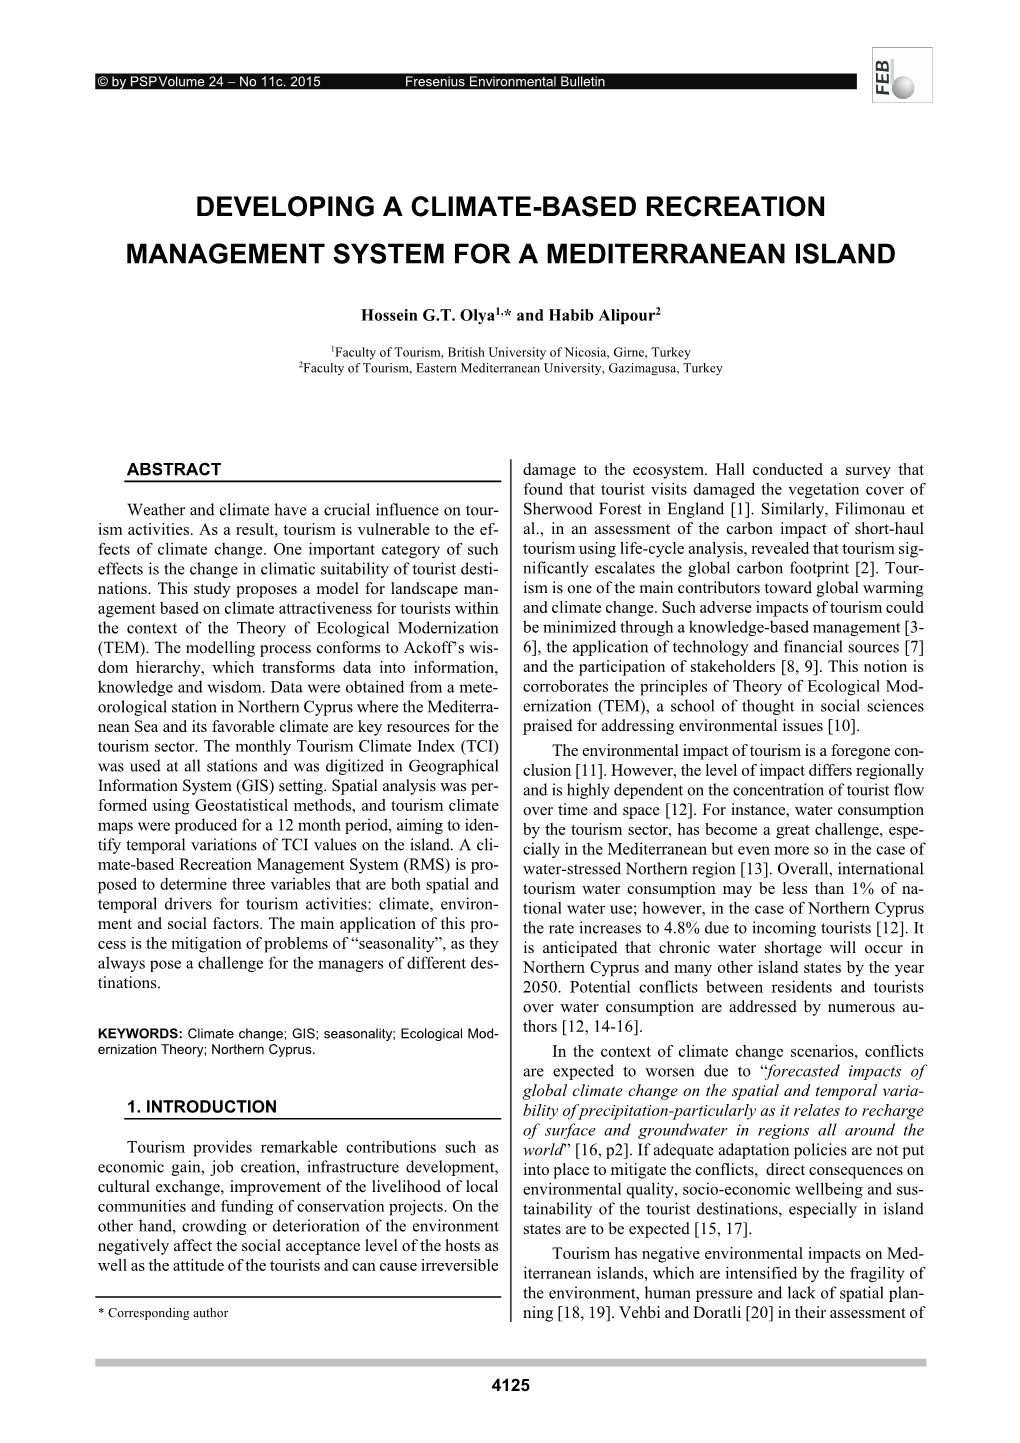 Developing a Climate-Based Recreation Management System for a Mediterranean Island